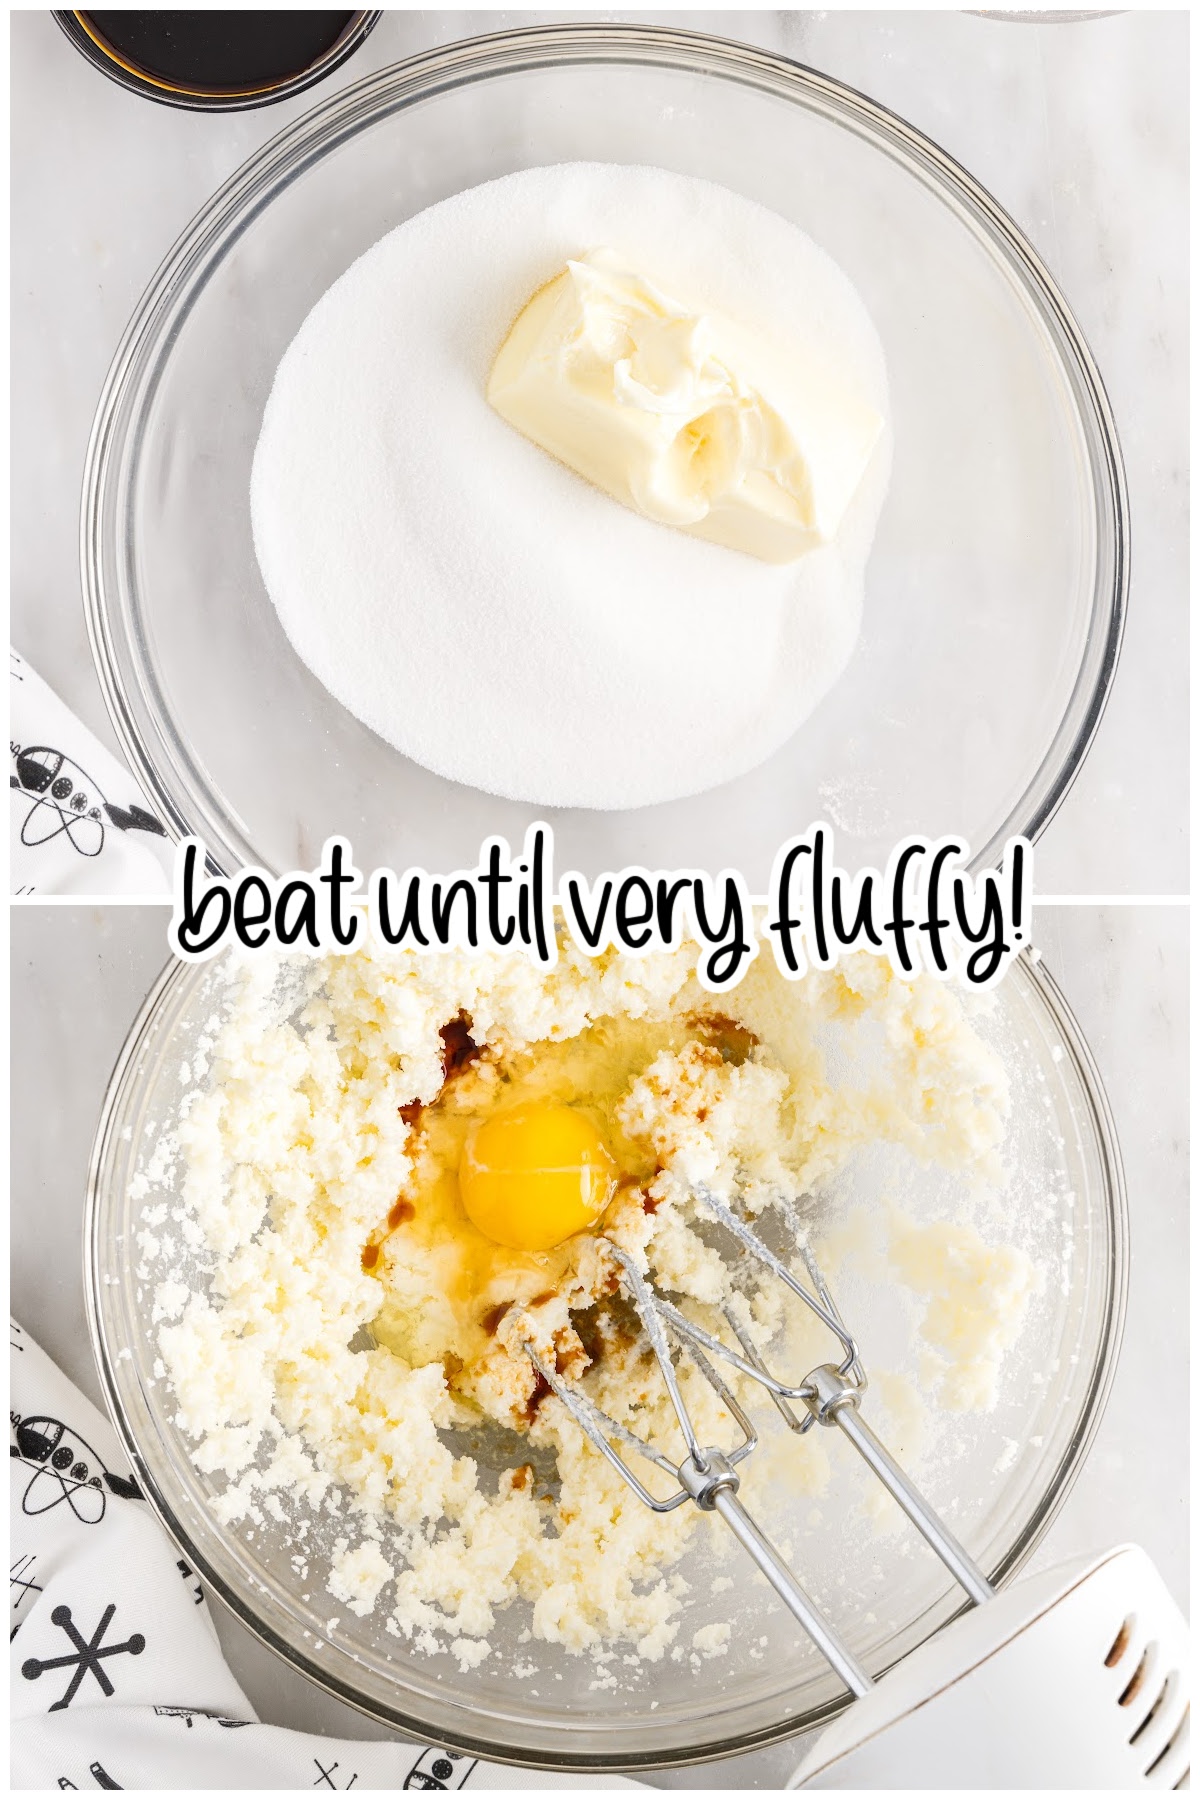 Butter and sugar in mixing bowl, then egg and vanila added to mixing bowl with text overlay "beat until very fluffy."